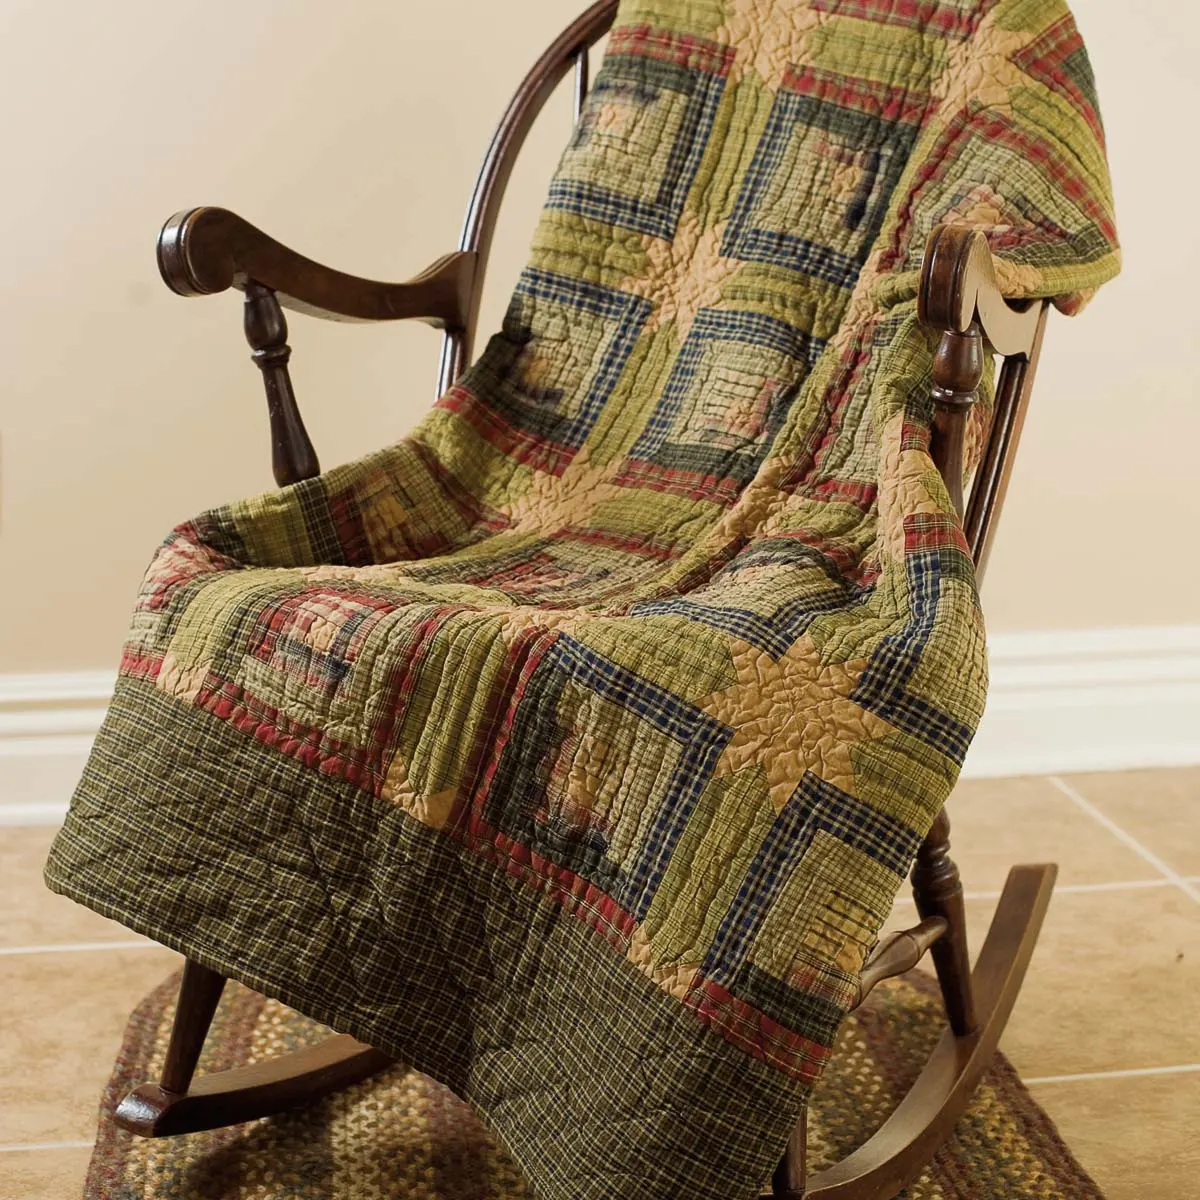 Tea Cabin Throw Quilted 60x50 display on rocker